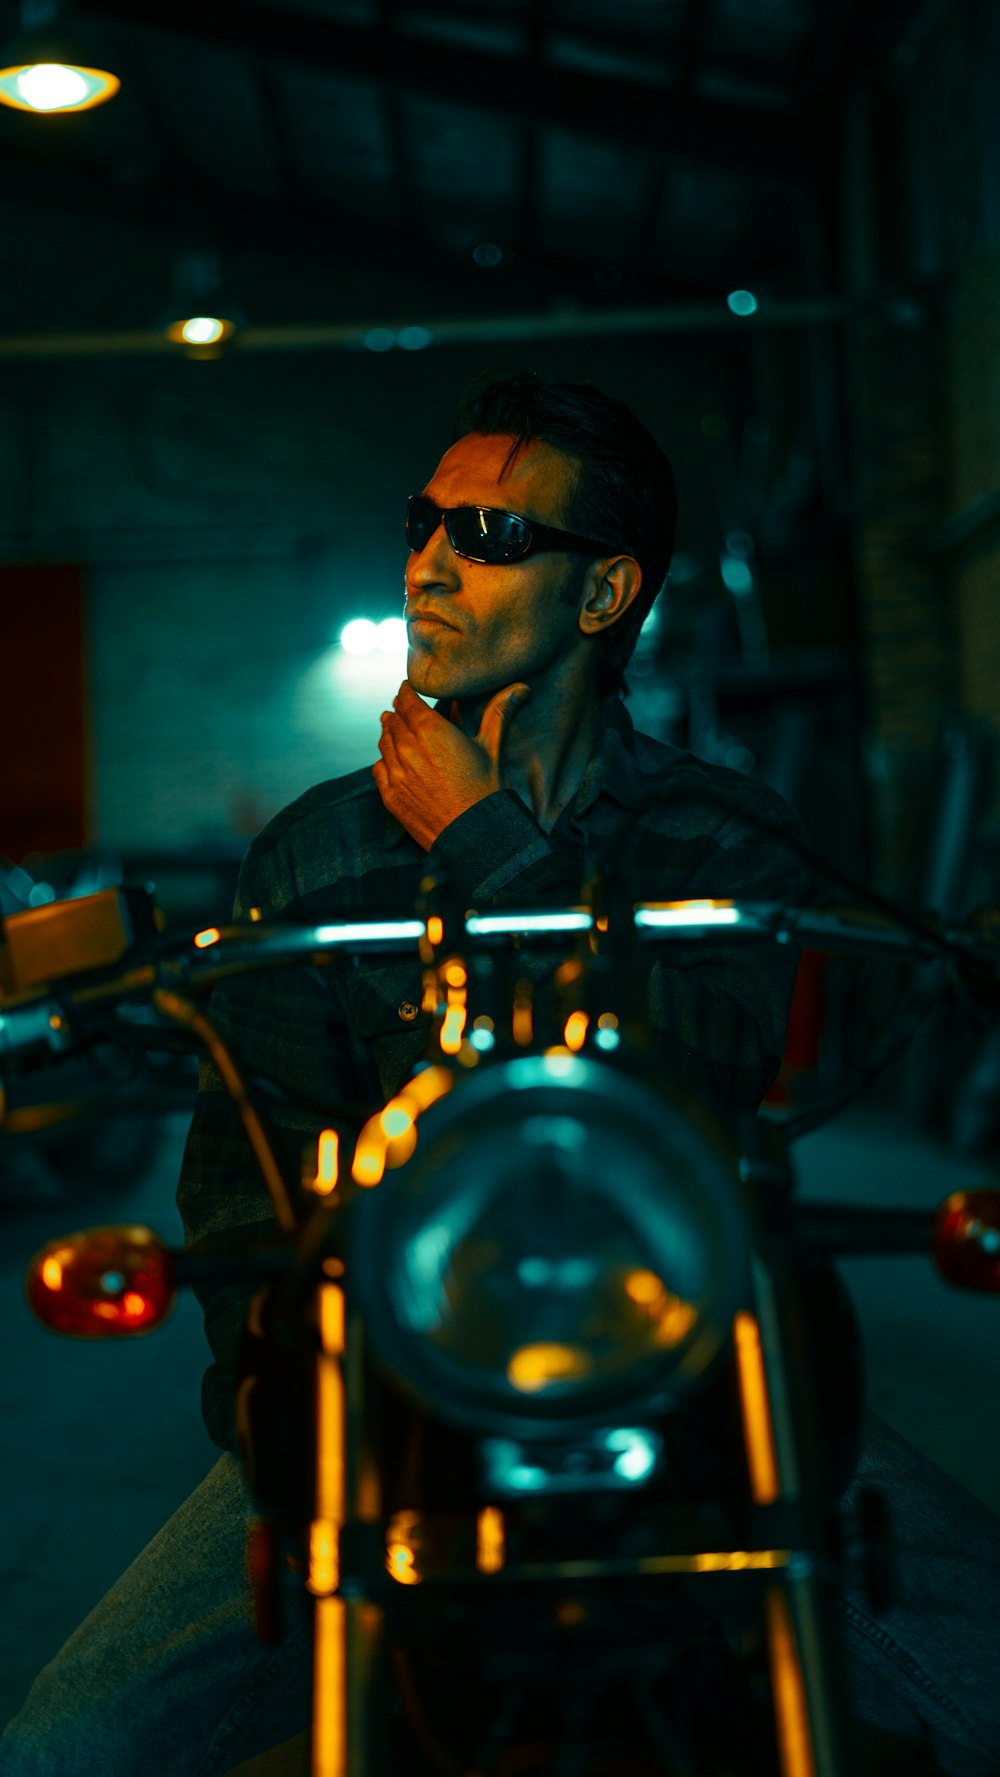 a man wearing sunglasses sitting on a motorcycle